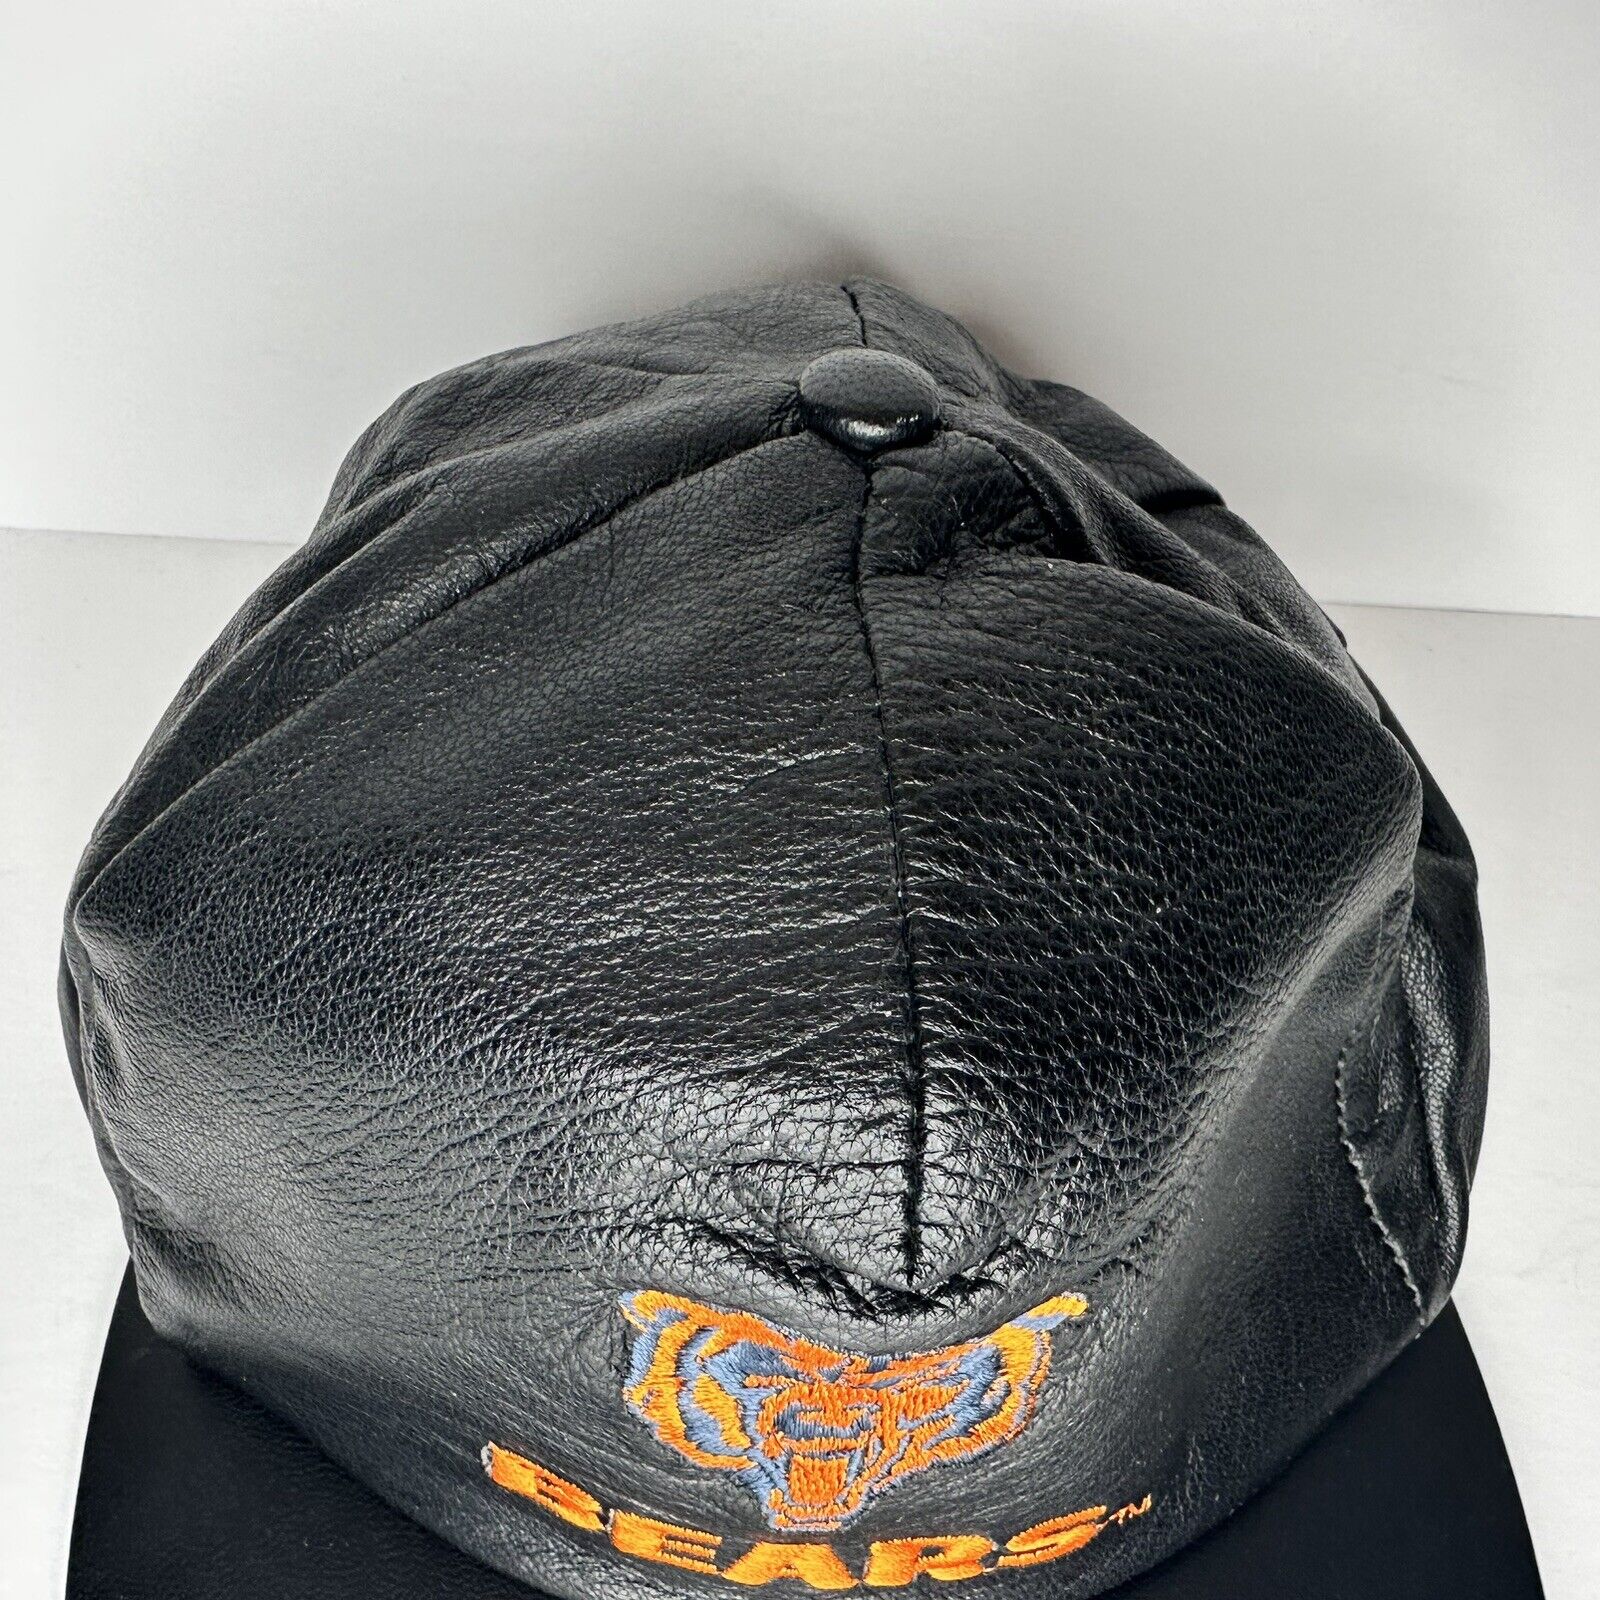 Vintage 90s Chicago Bears Leather Snapback Hat - NFL Football Cap by Cali Fame - TreasuTiques